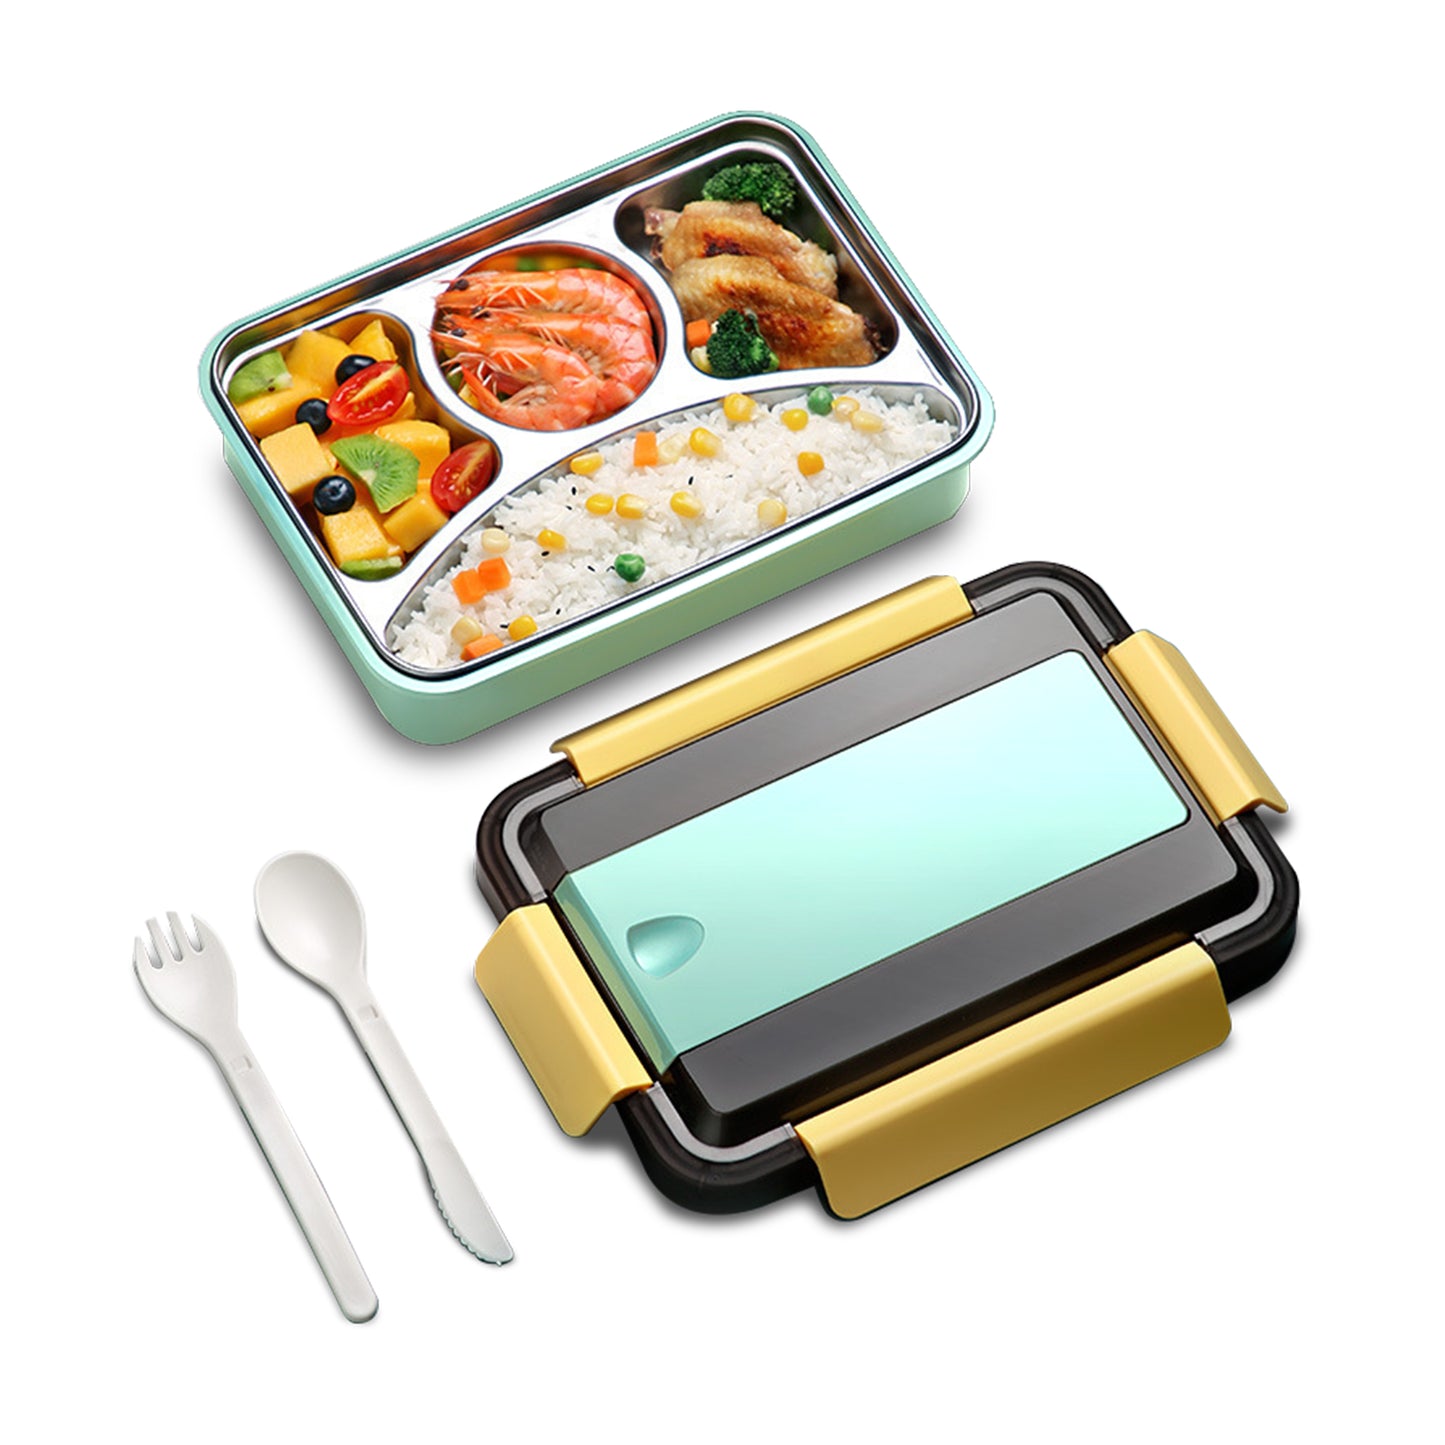 HASTHIP Lunch Box with Spoon Fork for Men Women Kids, 1000ml Stainless Steel Leakproof Bento Box with 4 Separate Compartments for School Office Camping (Light Green)